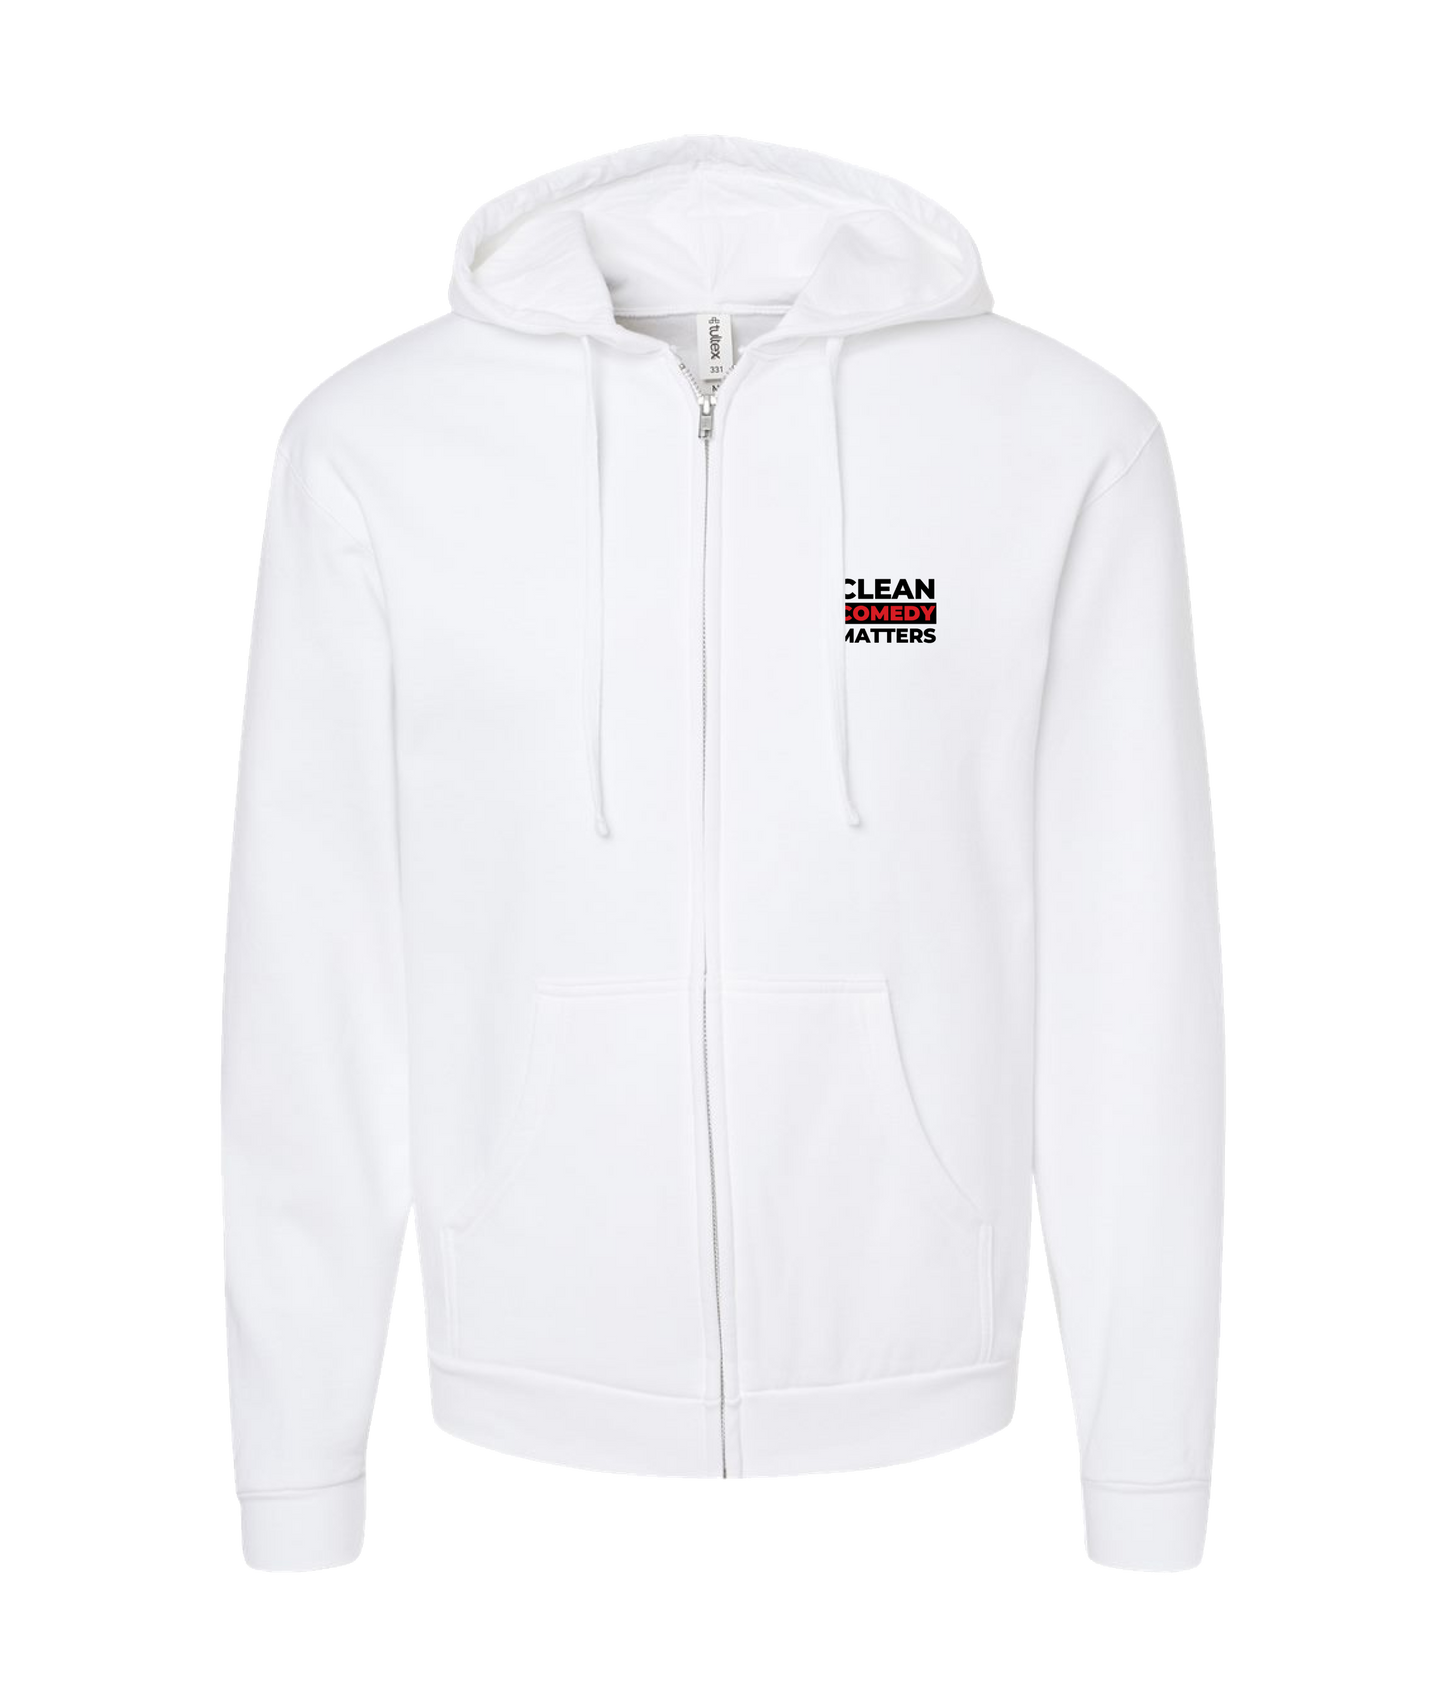 PT Bratton - Clean Comedy Matters - White Zip Up Hoodie